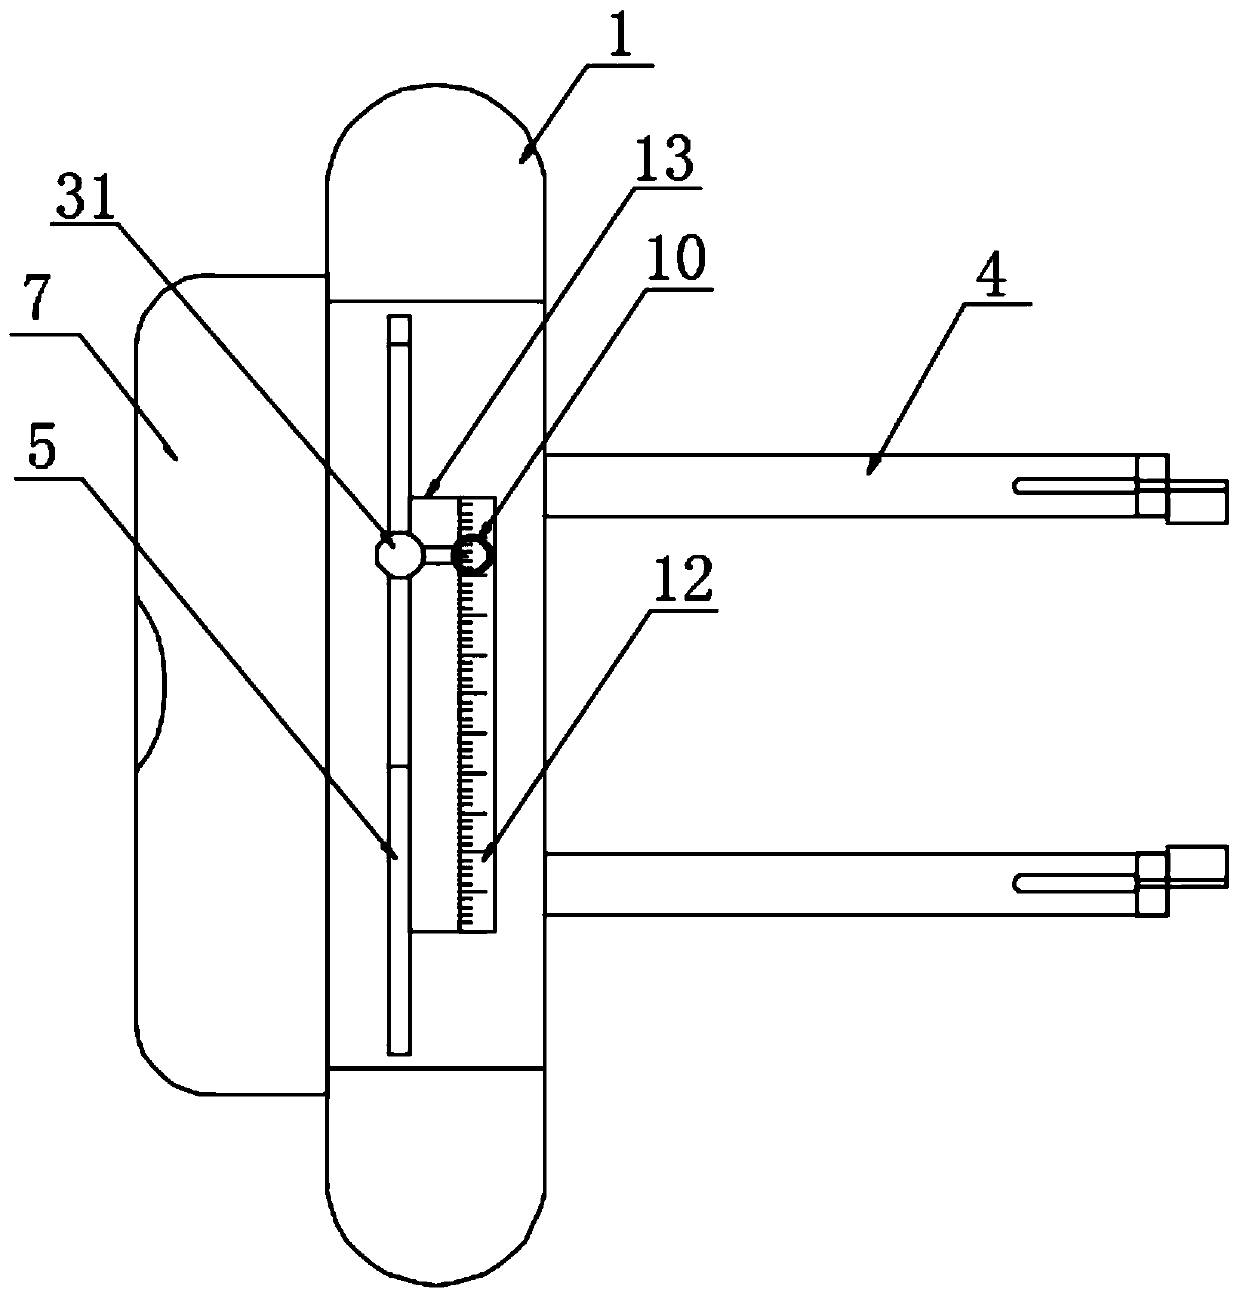 Operation auxiliary device for hepatobiliary surgery